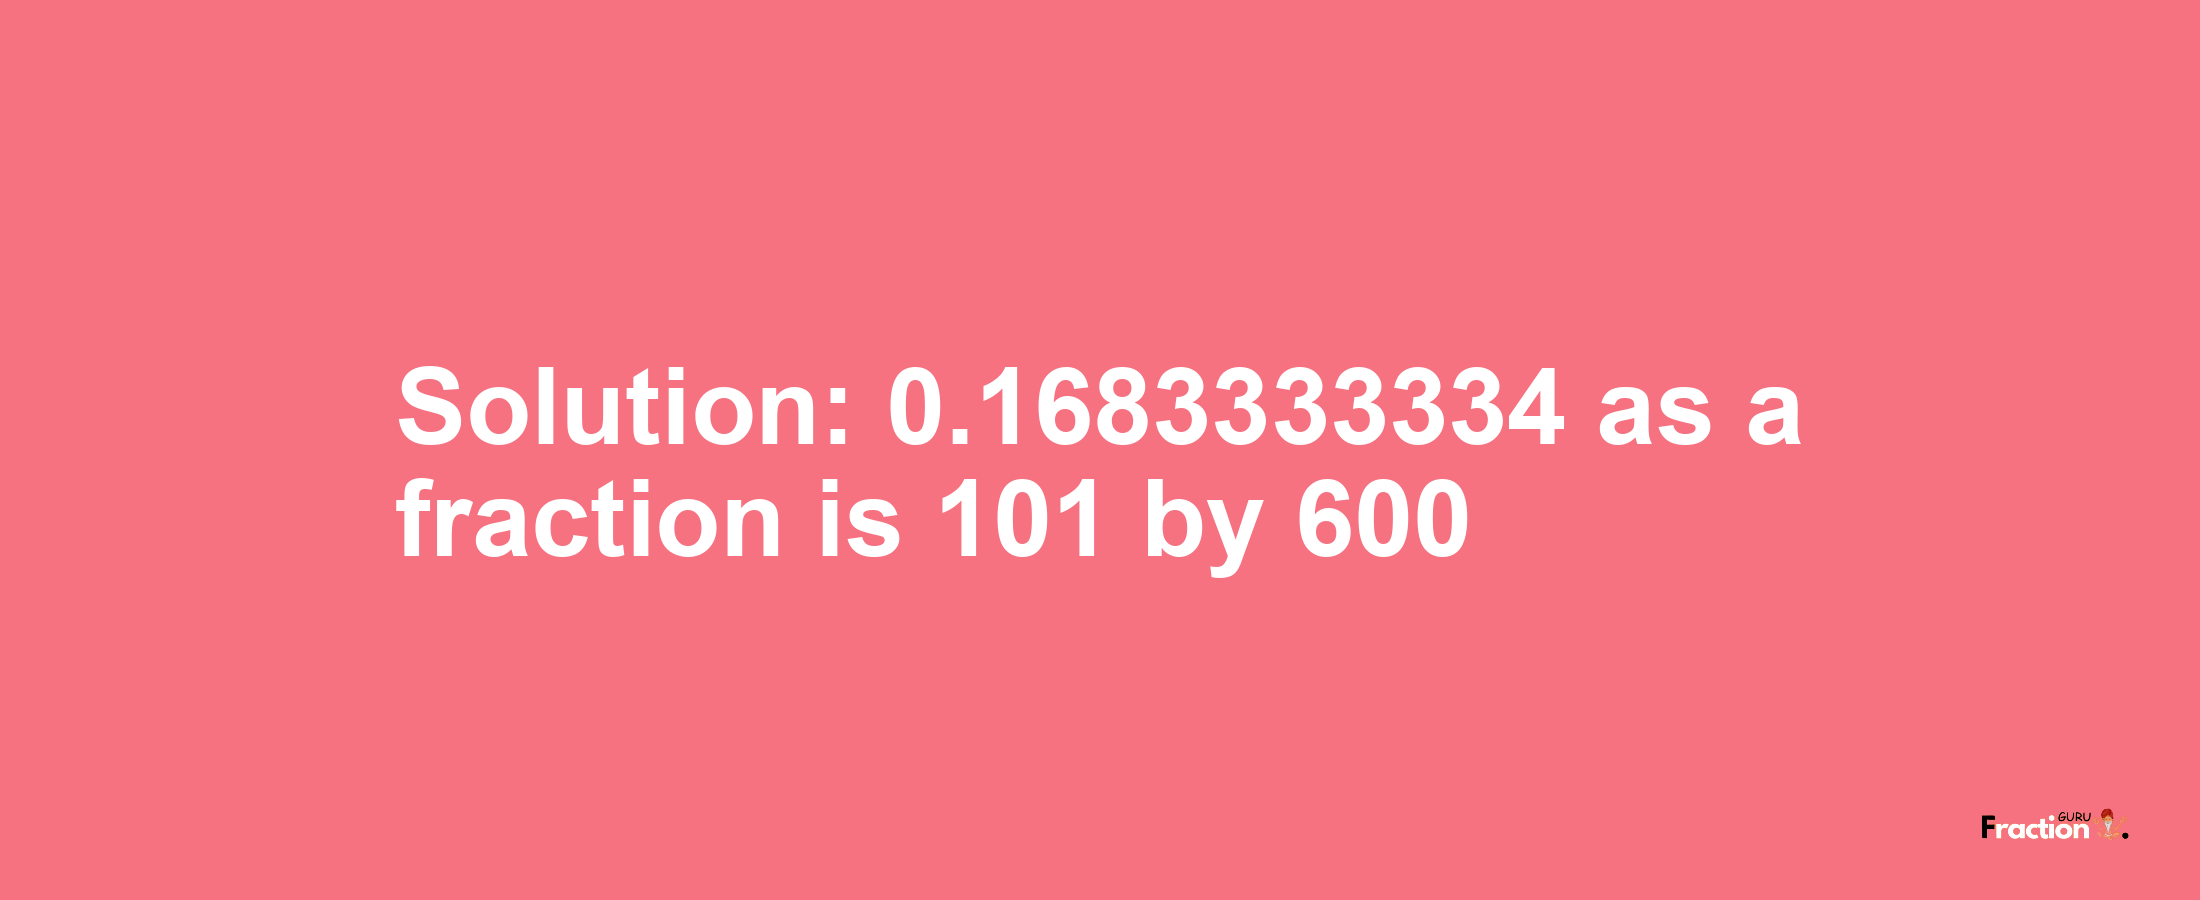 Solution:0.1683333334 as a fraction is 101/600